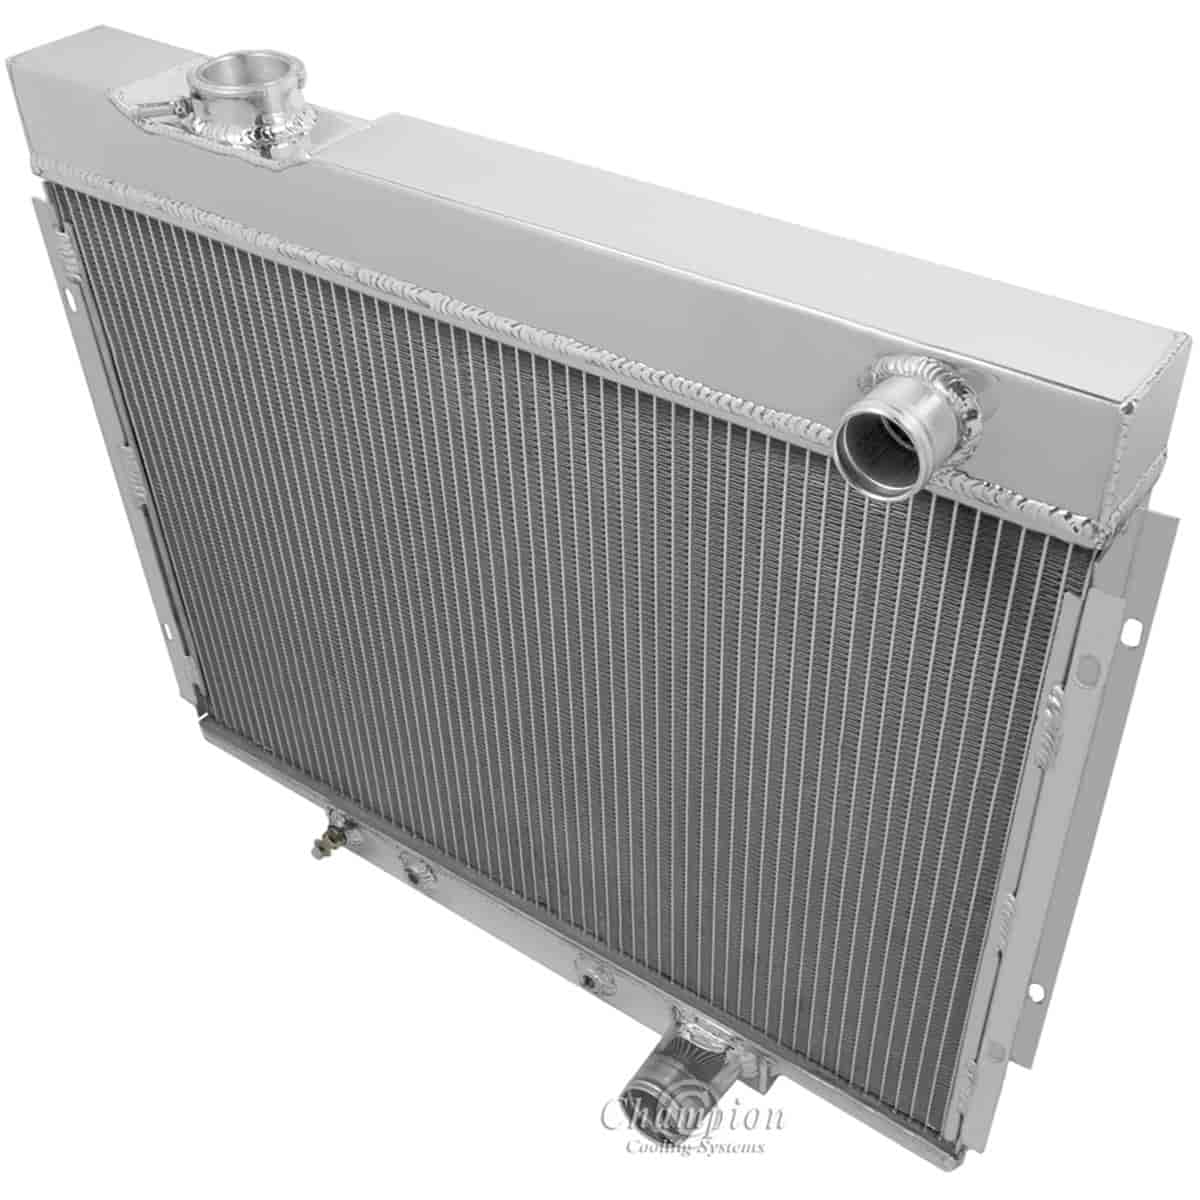 Monster Cooling-Series All-Aluminum Radiator Ford Galaxie, and